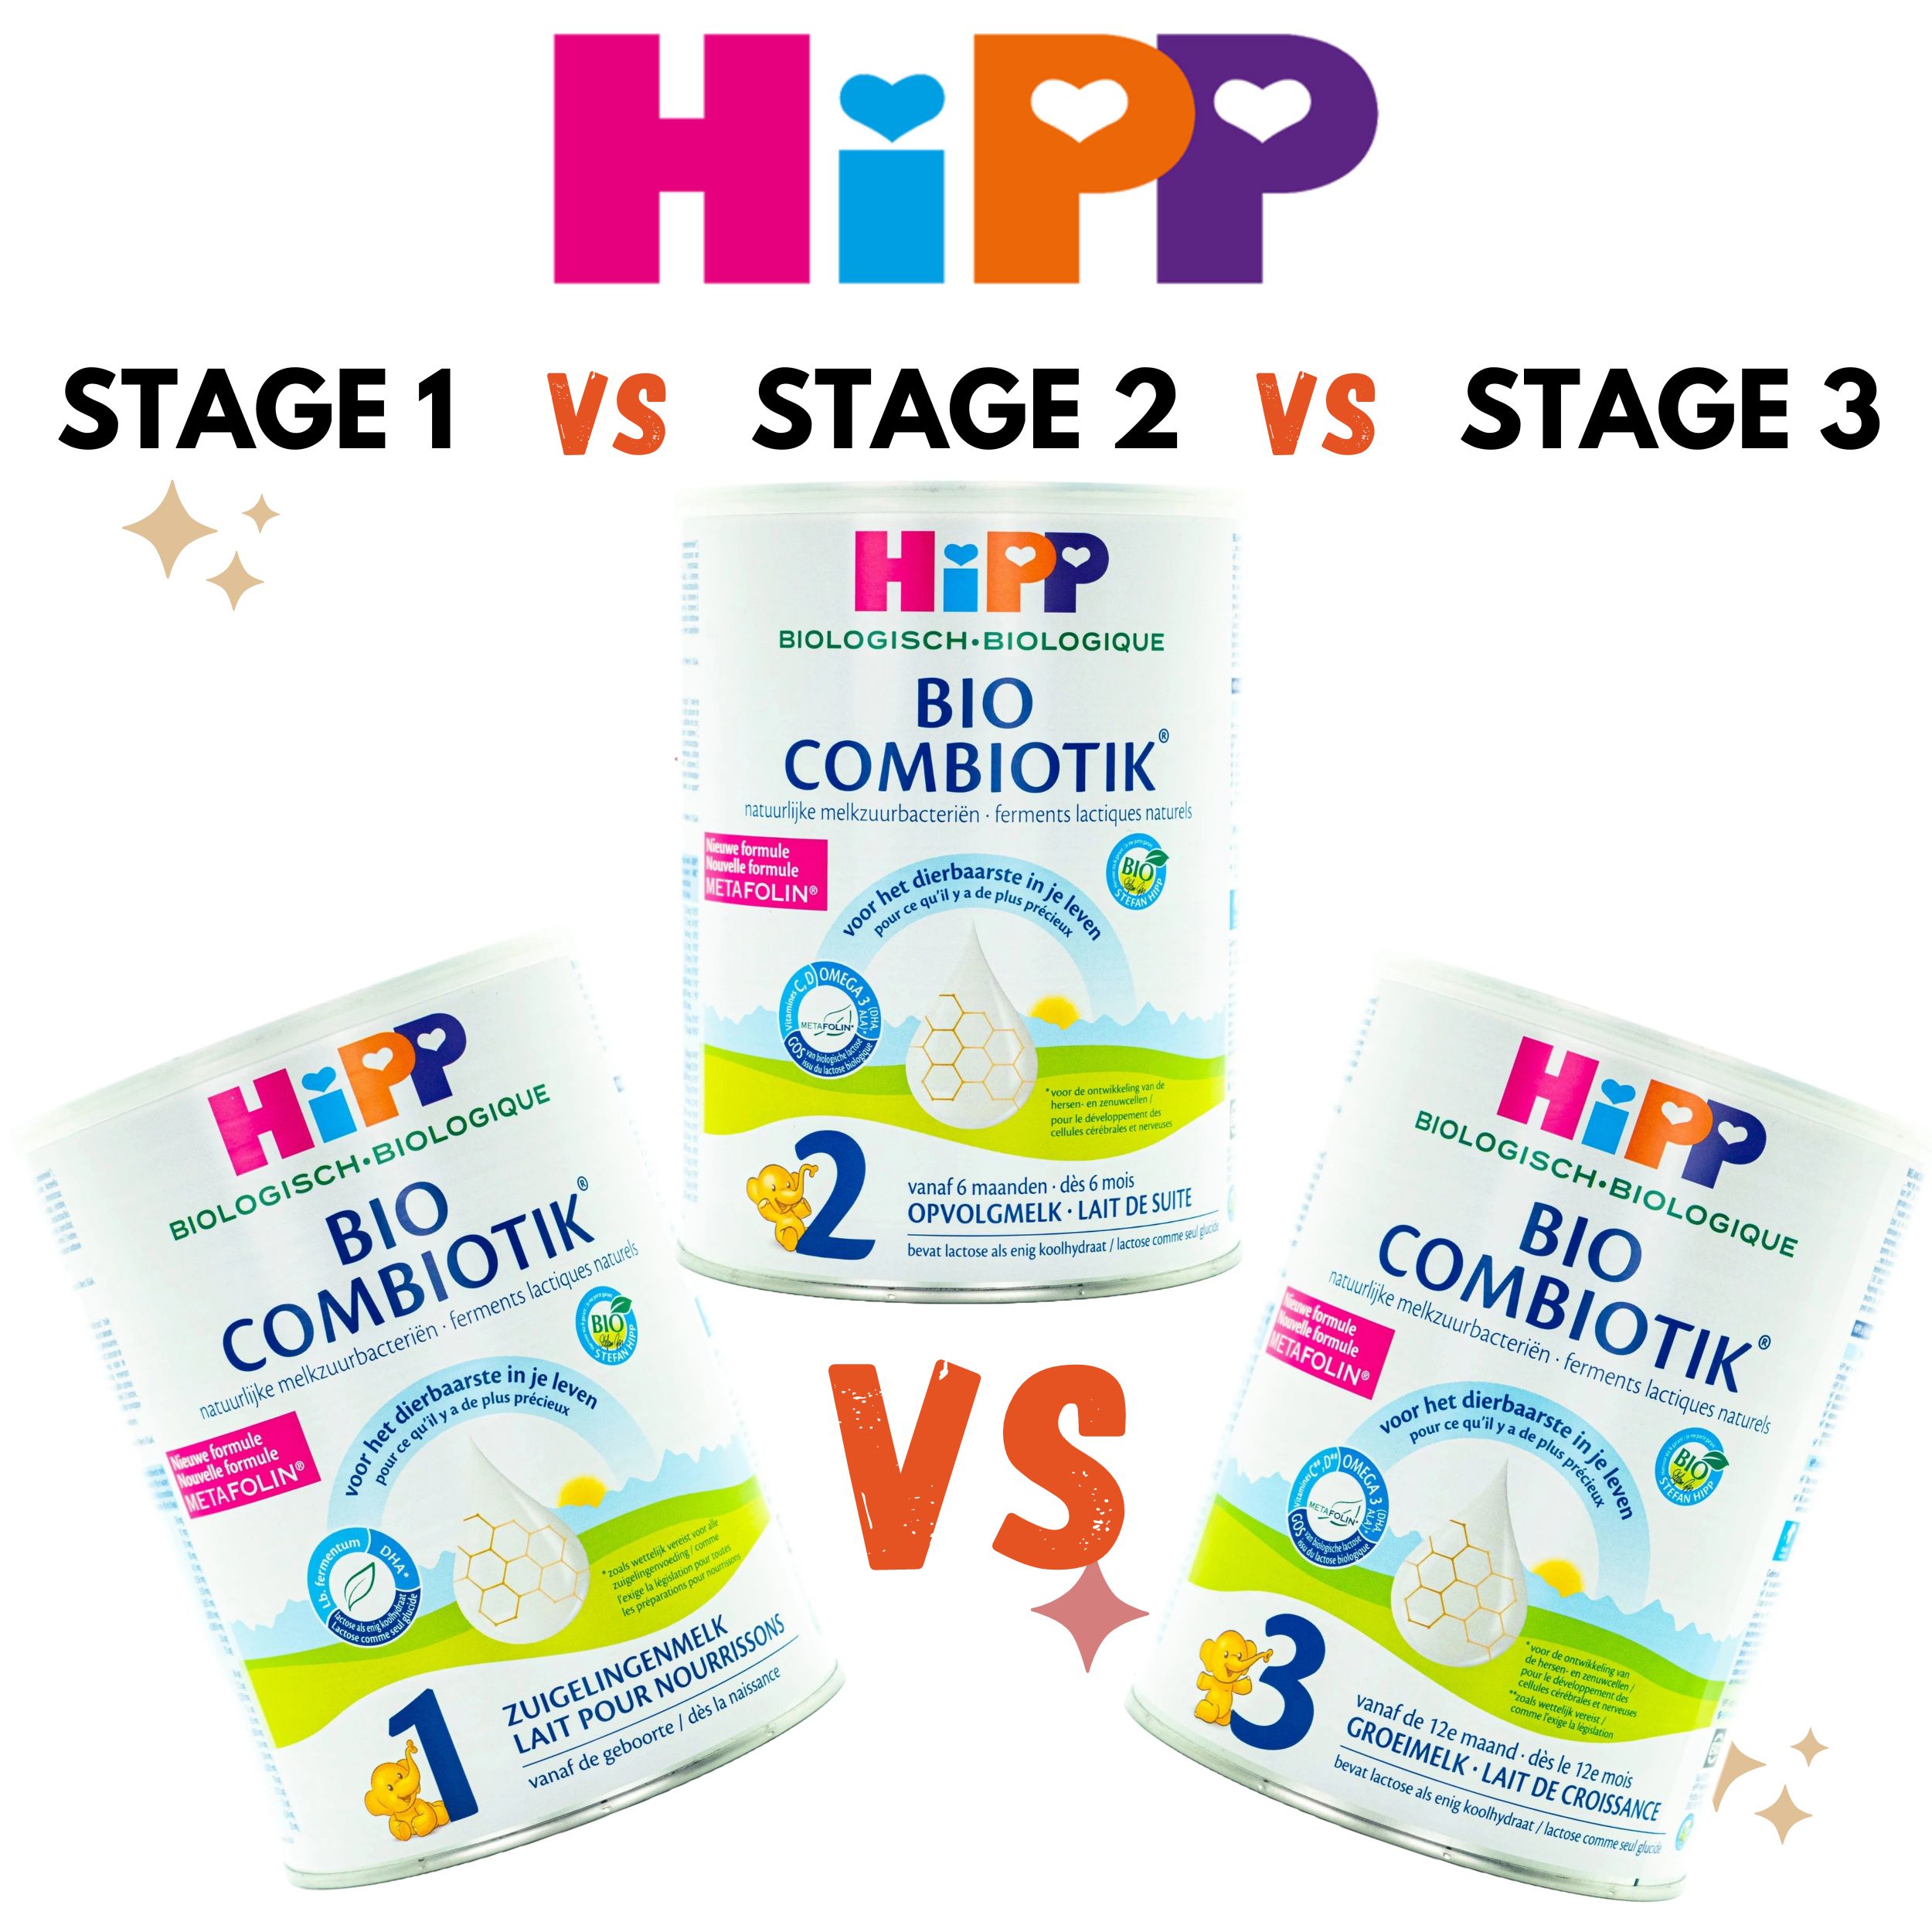 You are currently viewing HiPP Dutch Stage 1 Vs Stage 2 Vs Stage 3: What’s The Difference?